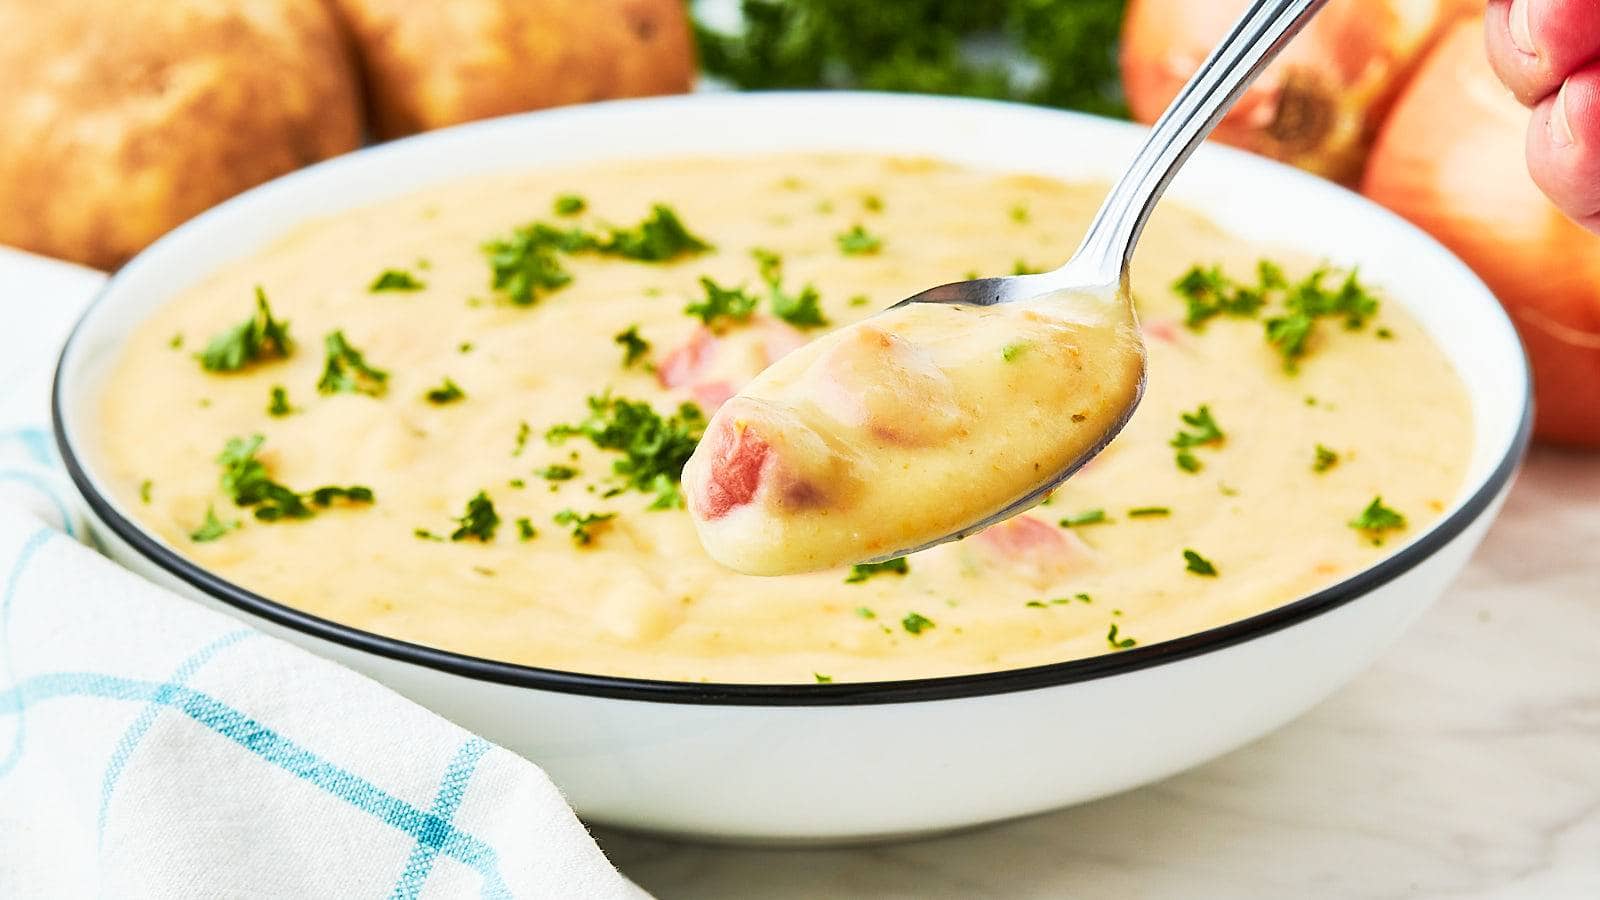 German Potato Soup recipe by Cheerful Cook.